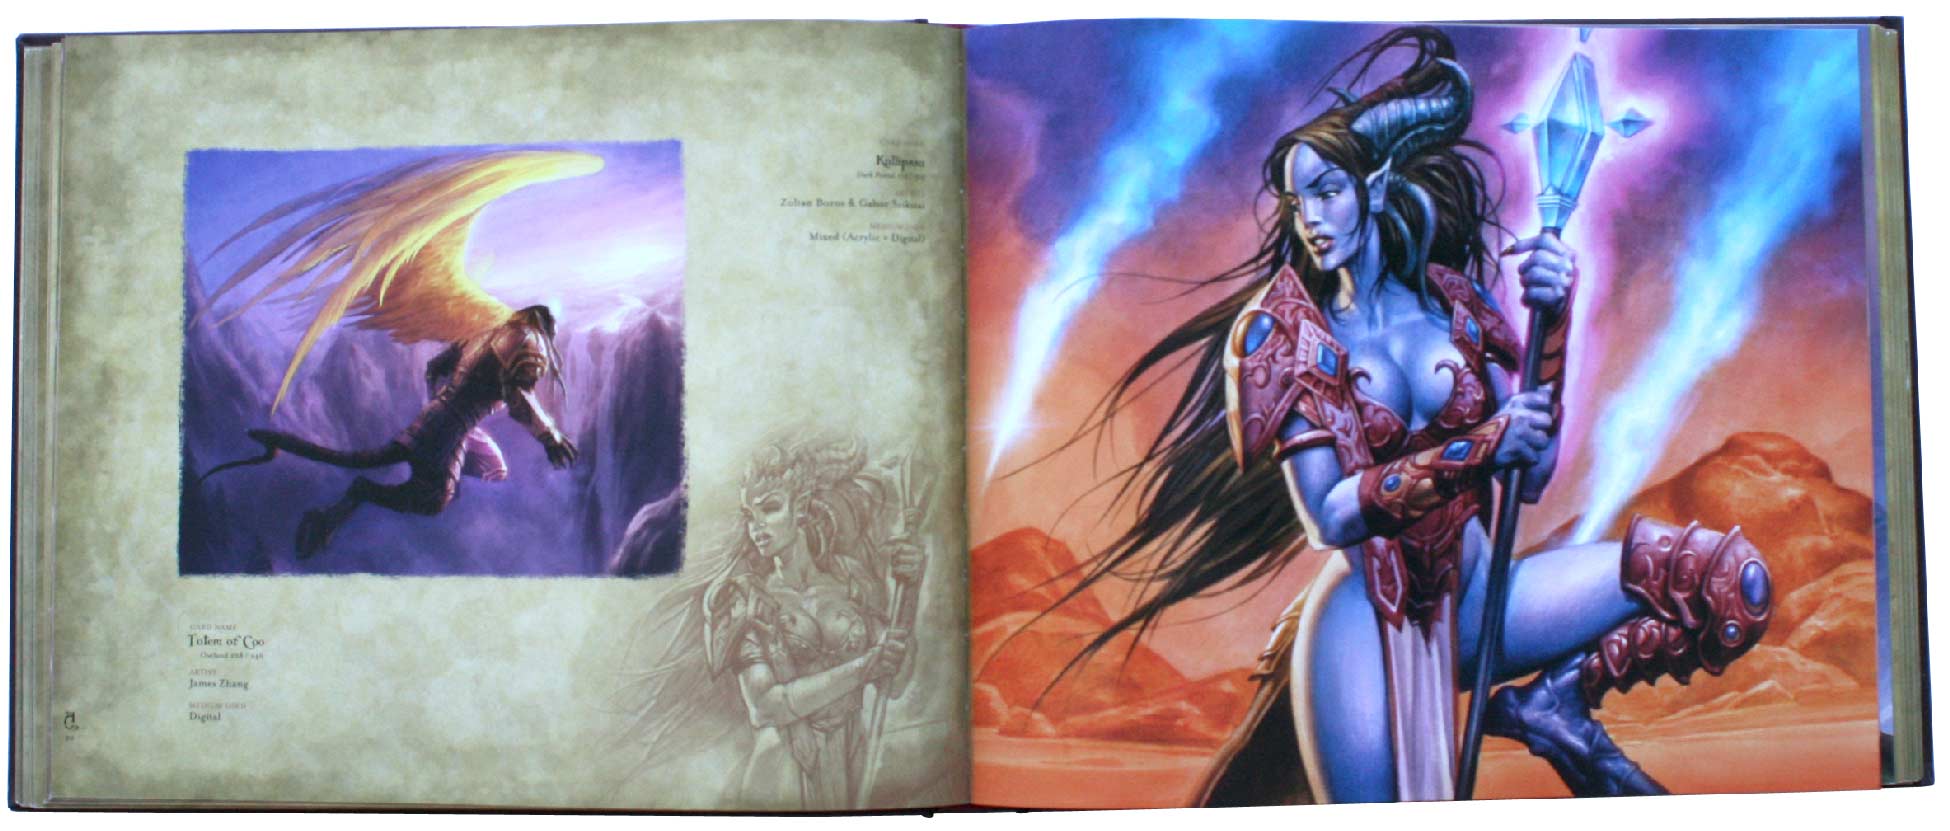 page 90 et 91 de l'art book : The Art of the Trading Card Game (World of Wacraft)